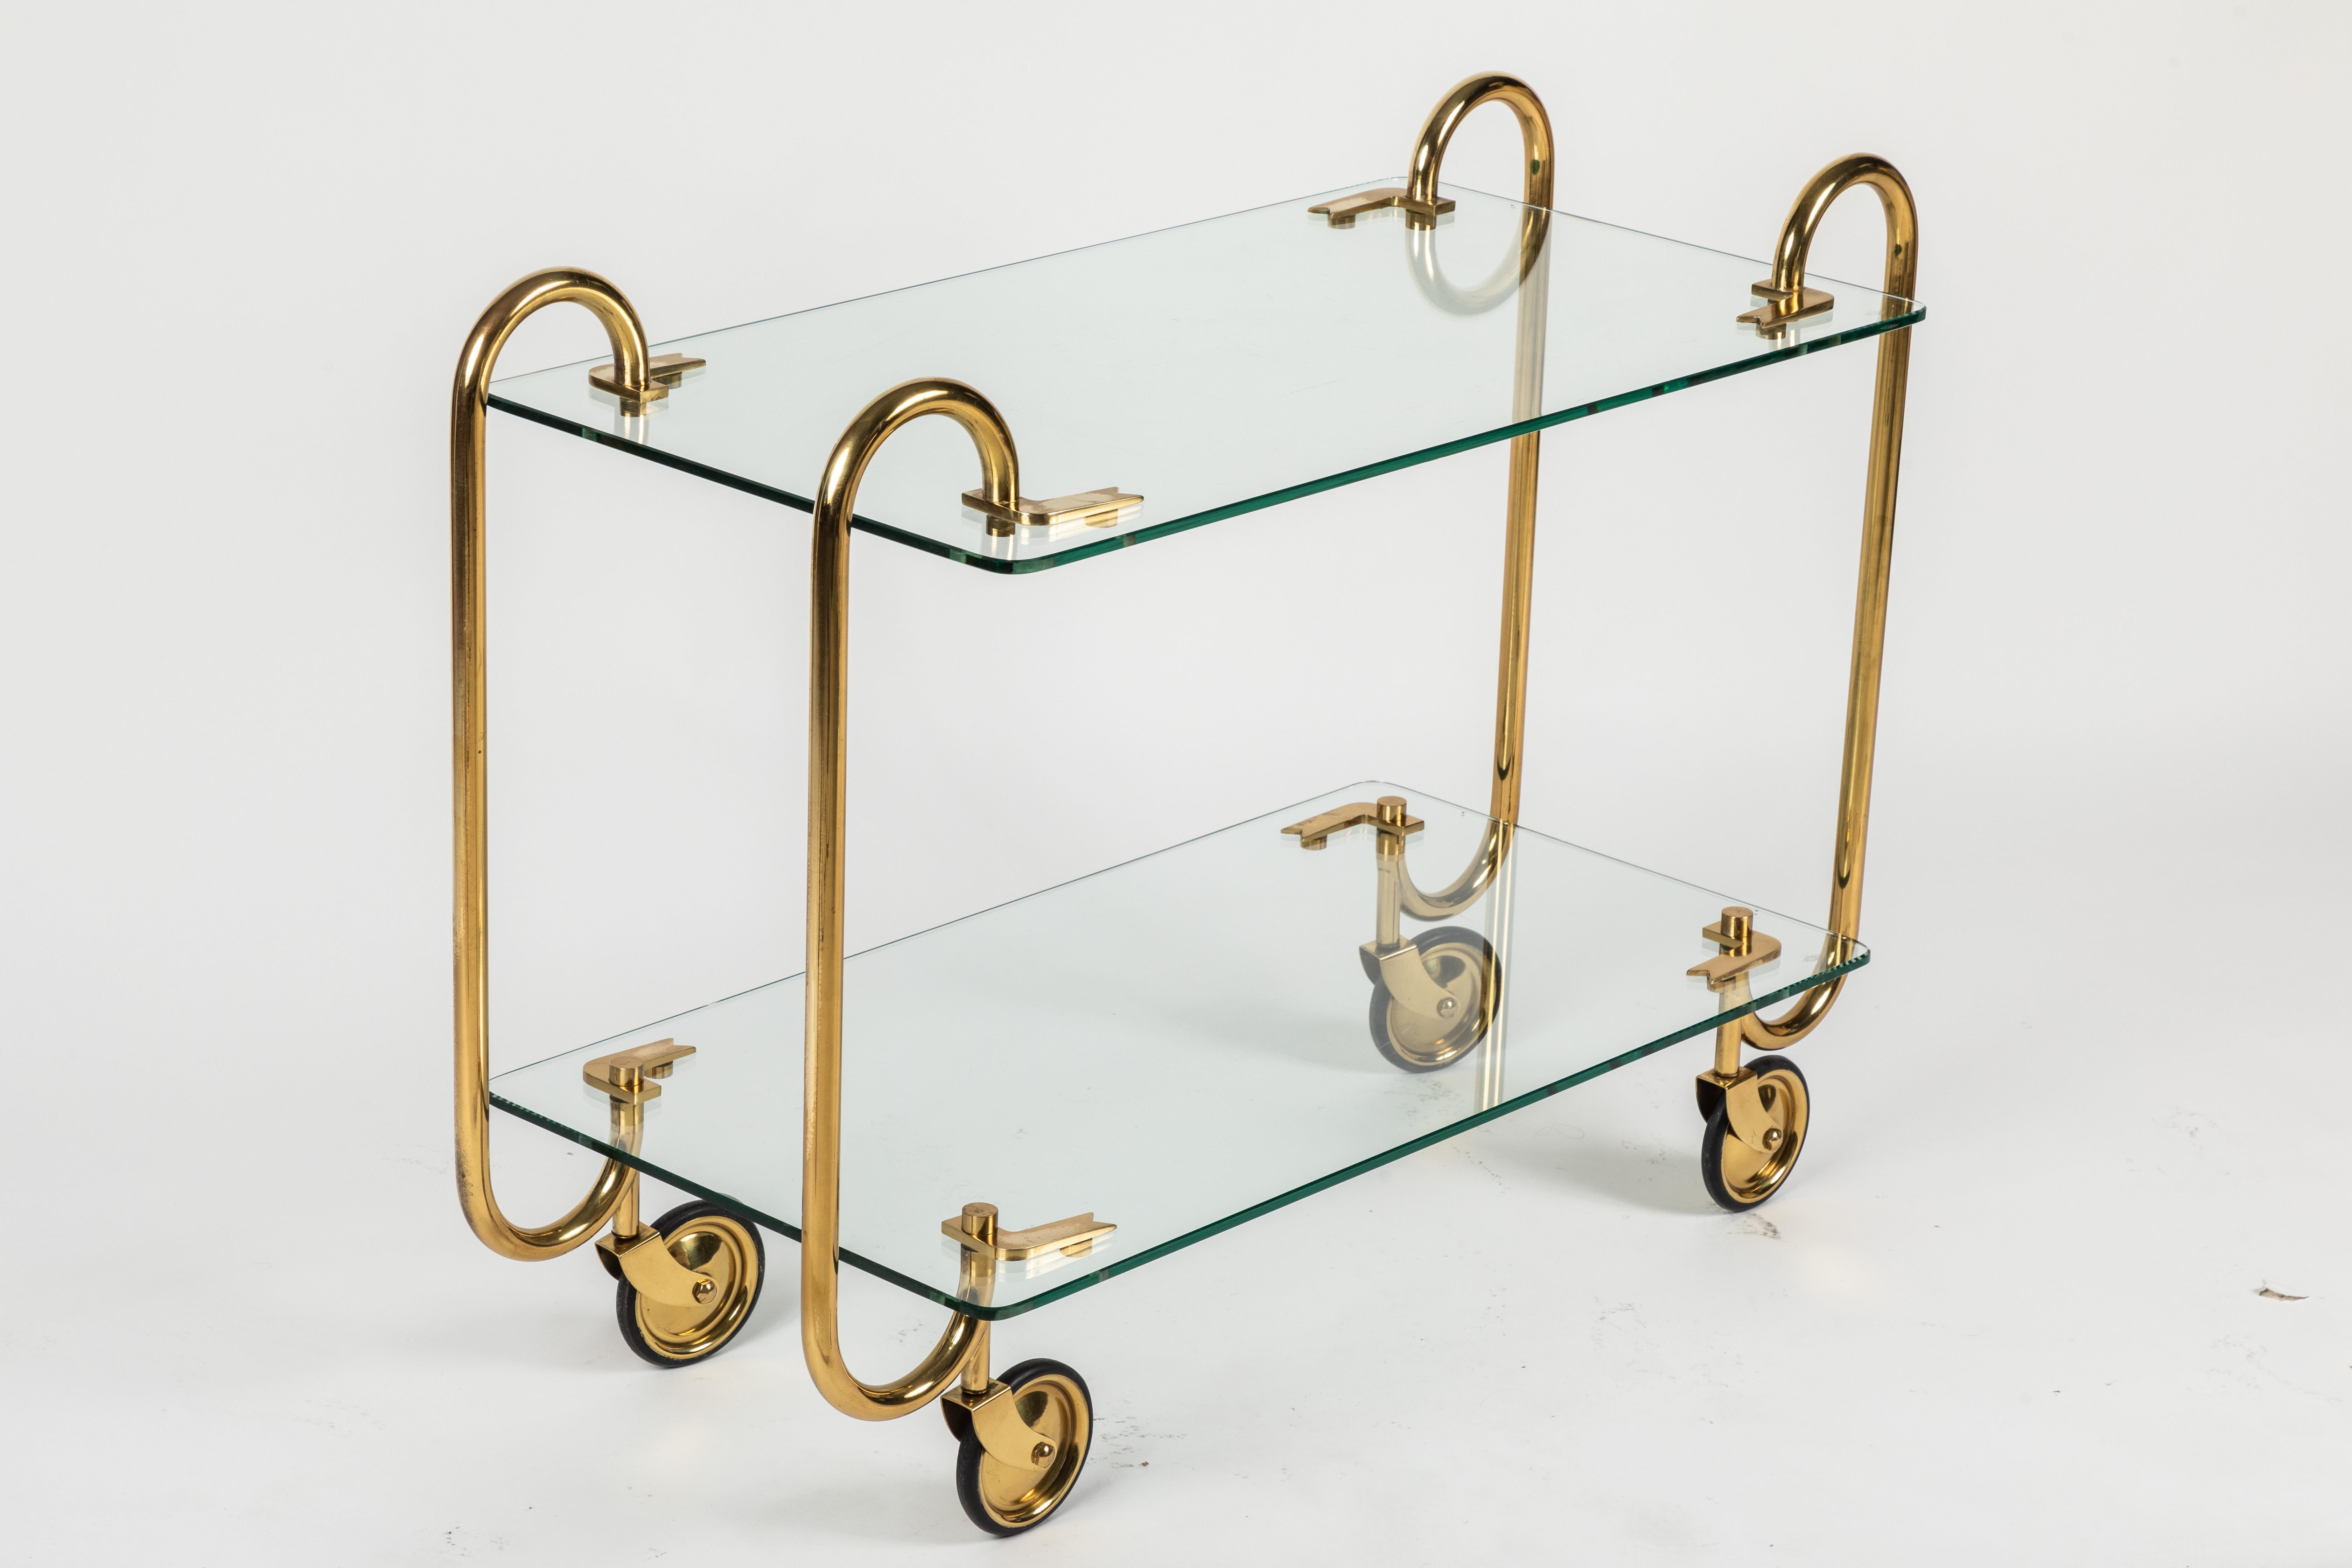 Iconic brass and glass drinks trolley designed and made by Italian powerhouse Fontana Arte. This classic design is made with tempered glass upper and lowers shelves and 4 brass structures ending in brass wheels.
Glass is in perfect condition and